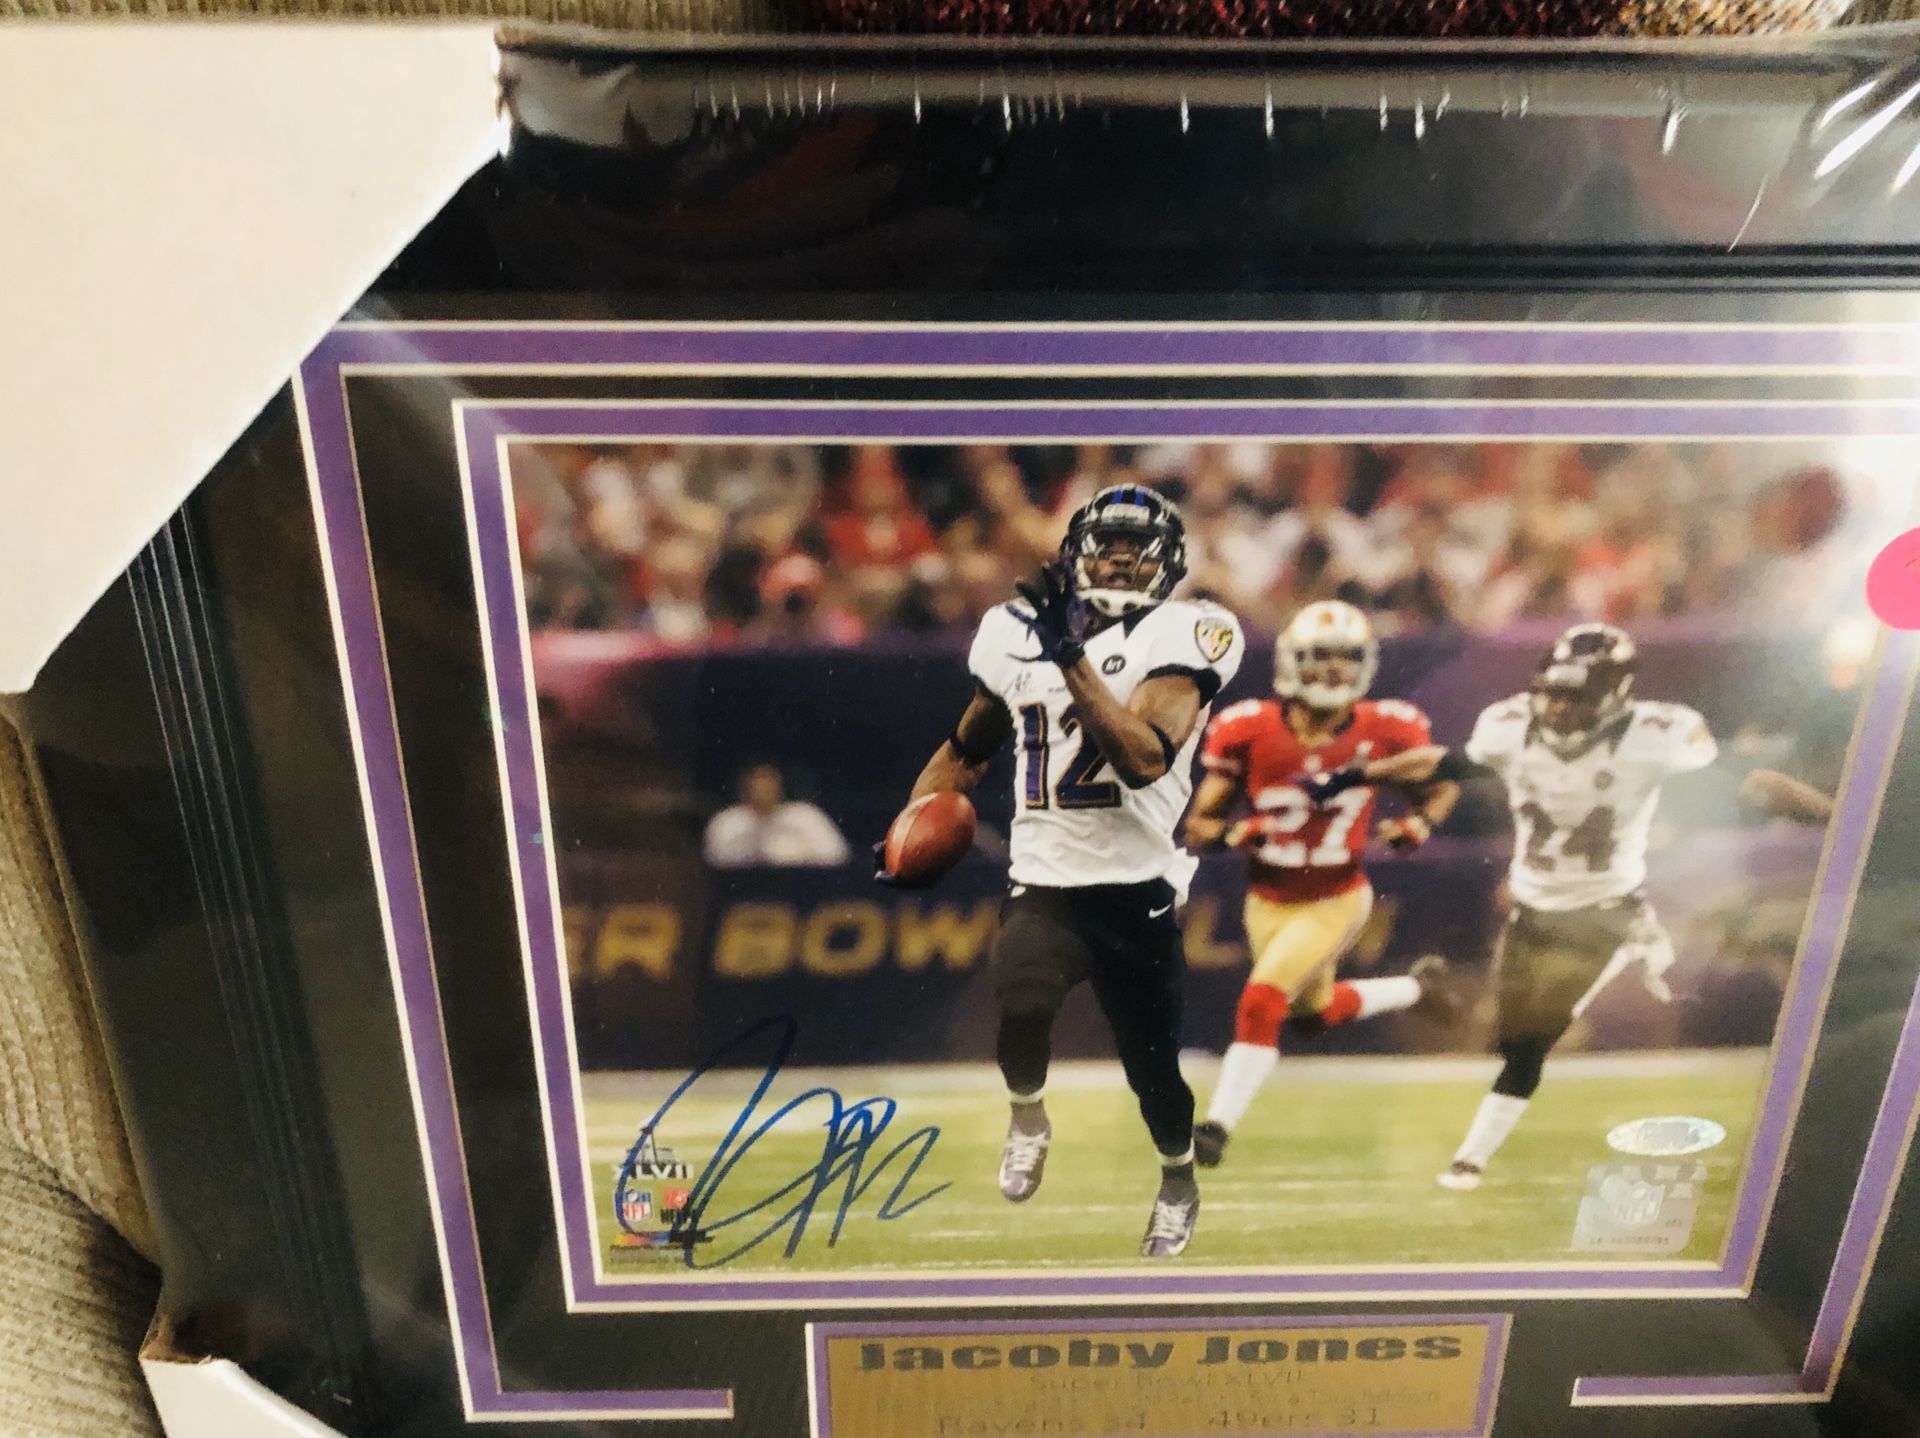 Autographed Jacoby Jones Baltimore Ravens Super Bowl Champion framed 8x10 Photo in a 11x14 Black Frame, Comes with Certificate of Authenticity! Black